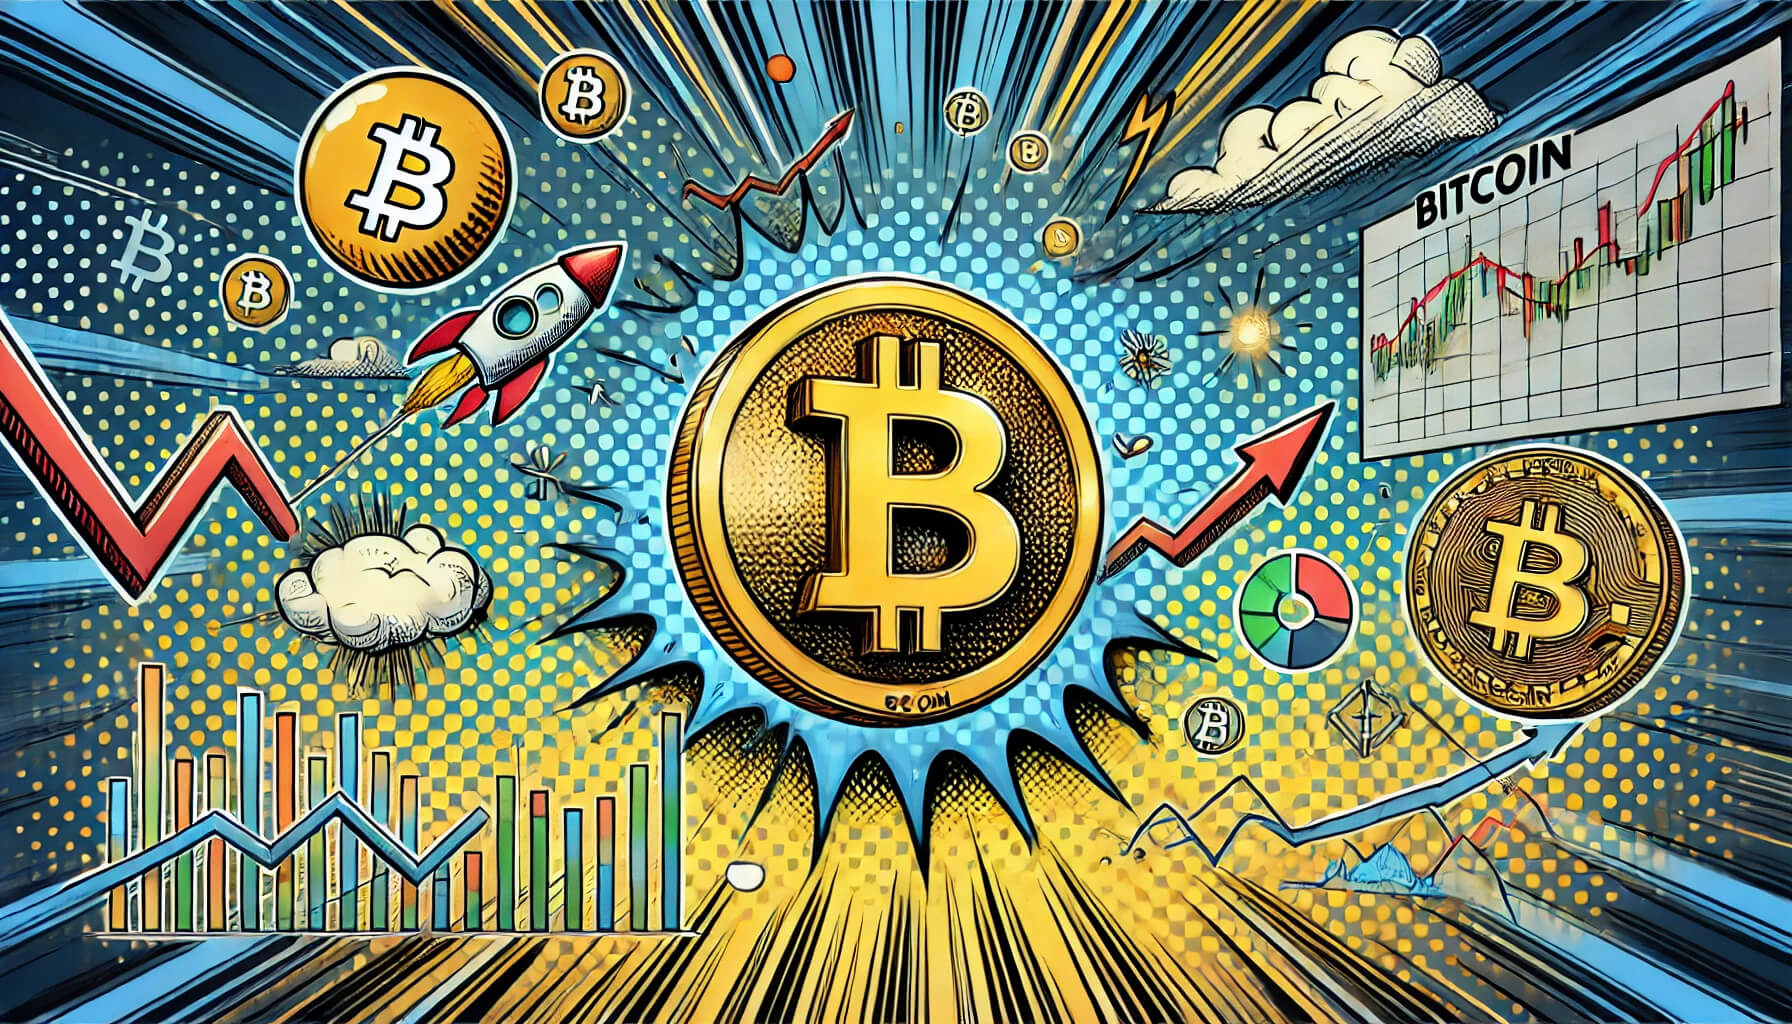 Bitcoin Market Analysis: Current Trends, Price Movements, and Future Projections